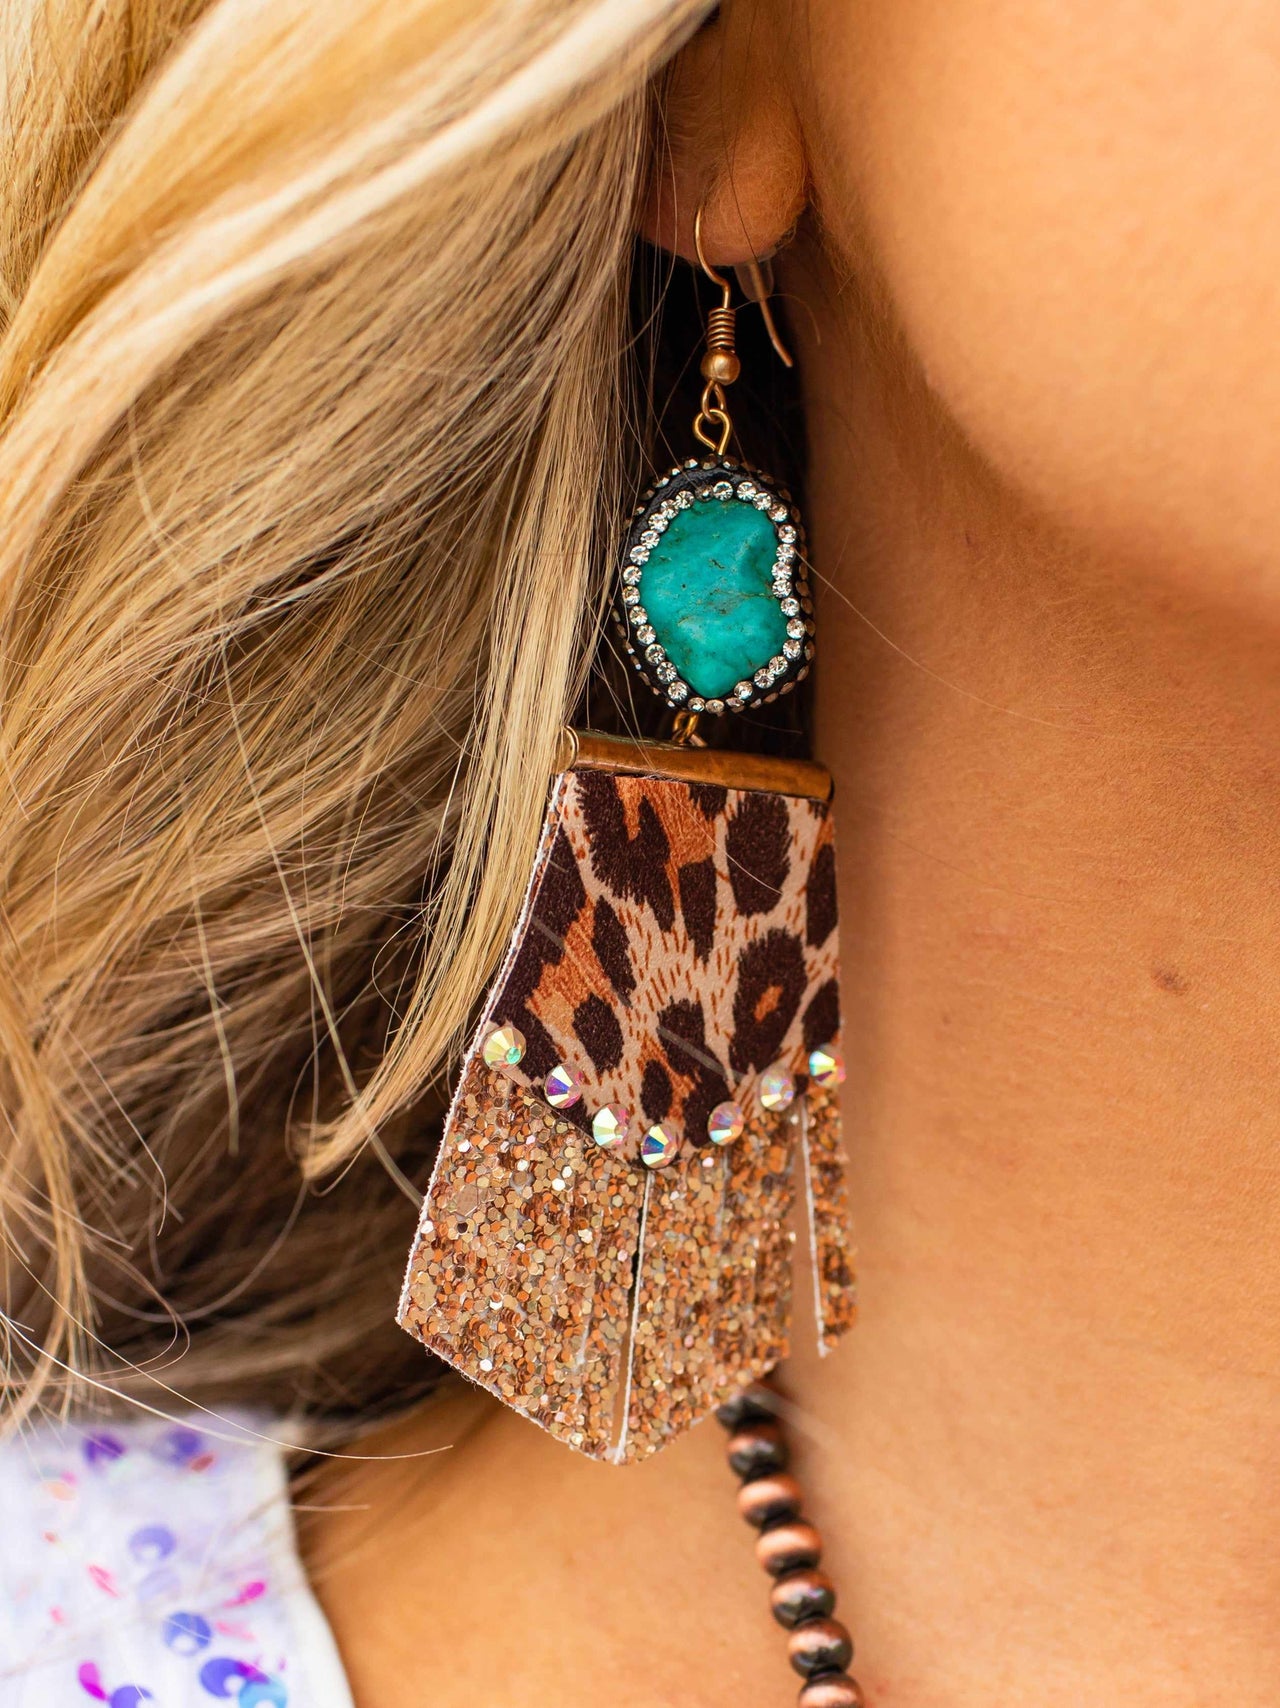 Glitzy Leopard Square Turquoise Stone Earrings